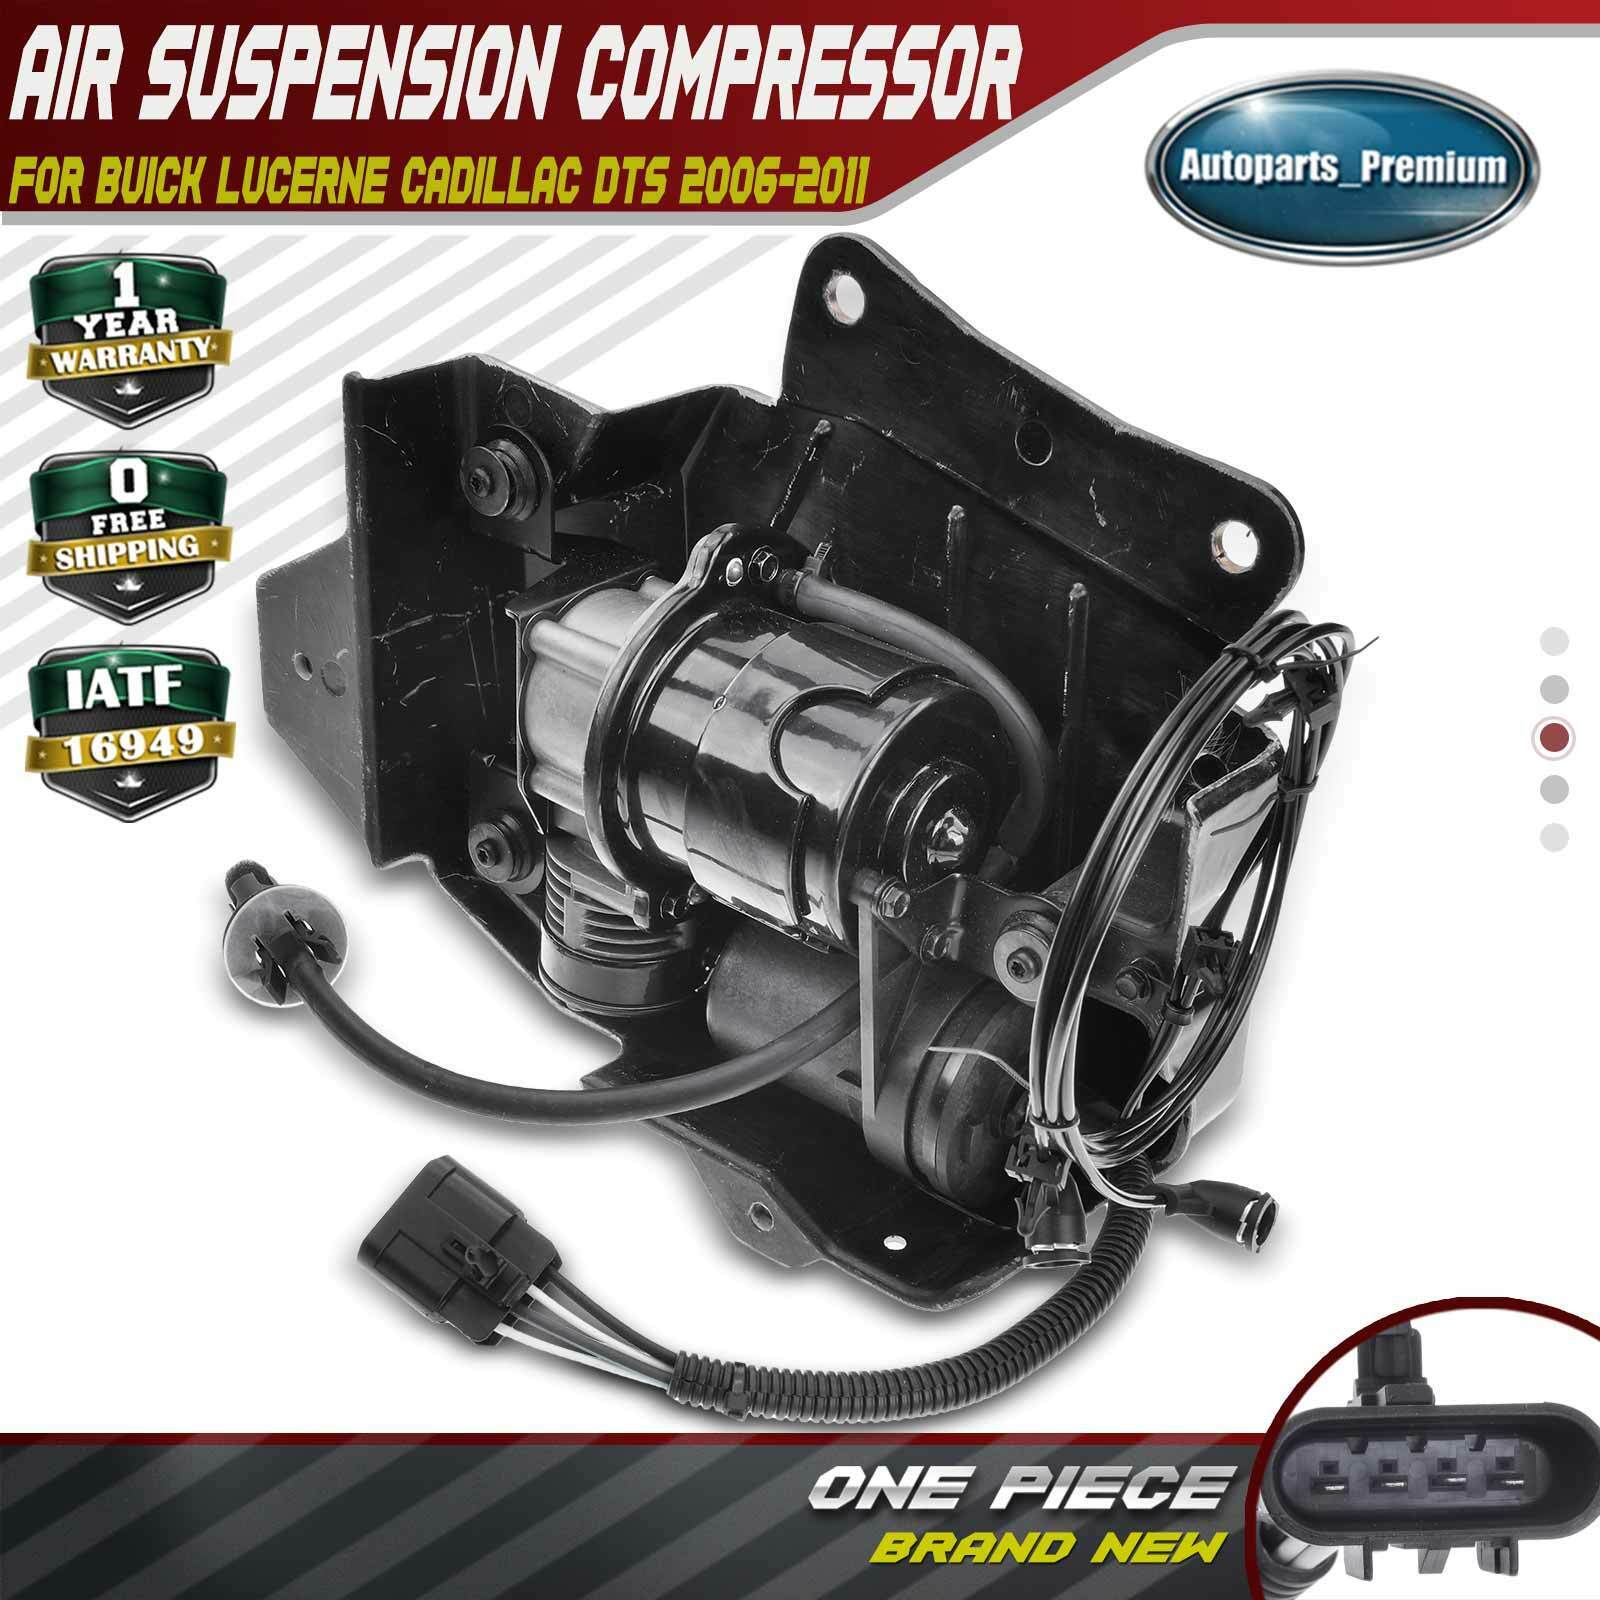 Air Suspension Compressor for Buick Lucerne 2006-2011 Cadillac DTS 2006-2011